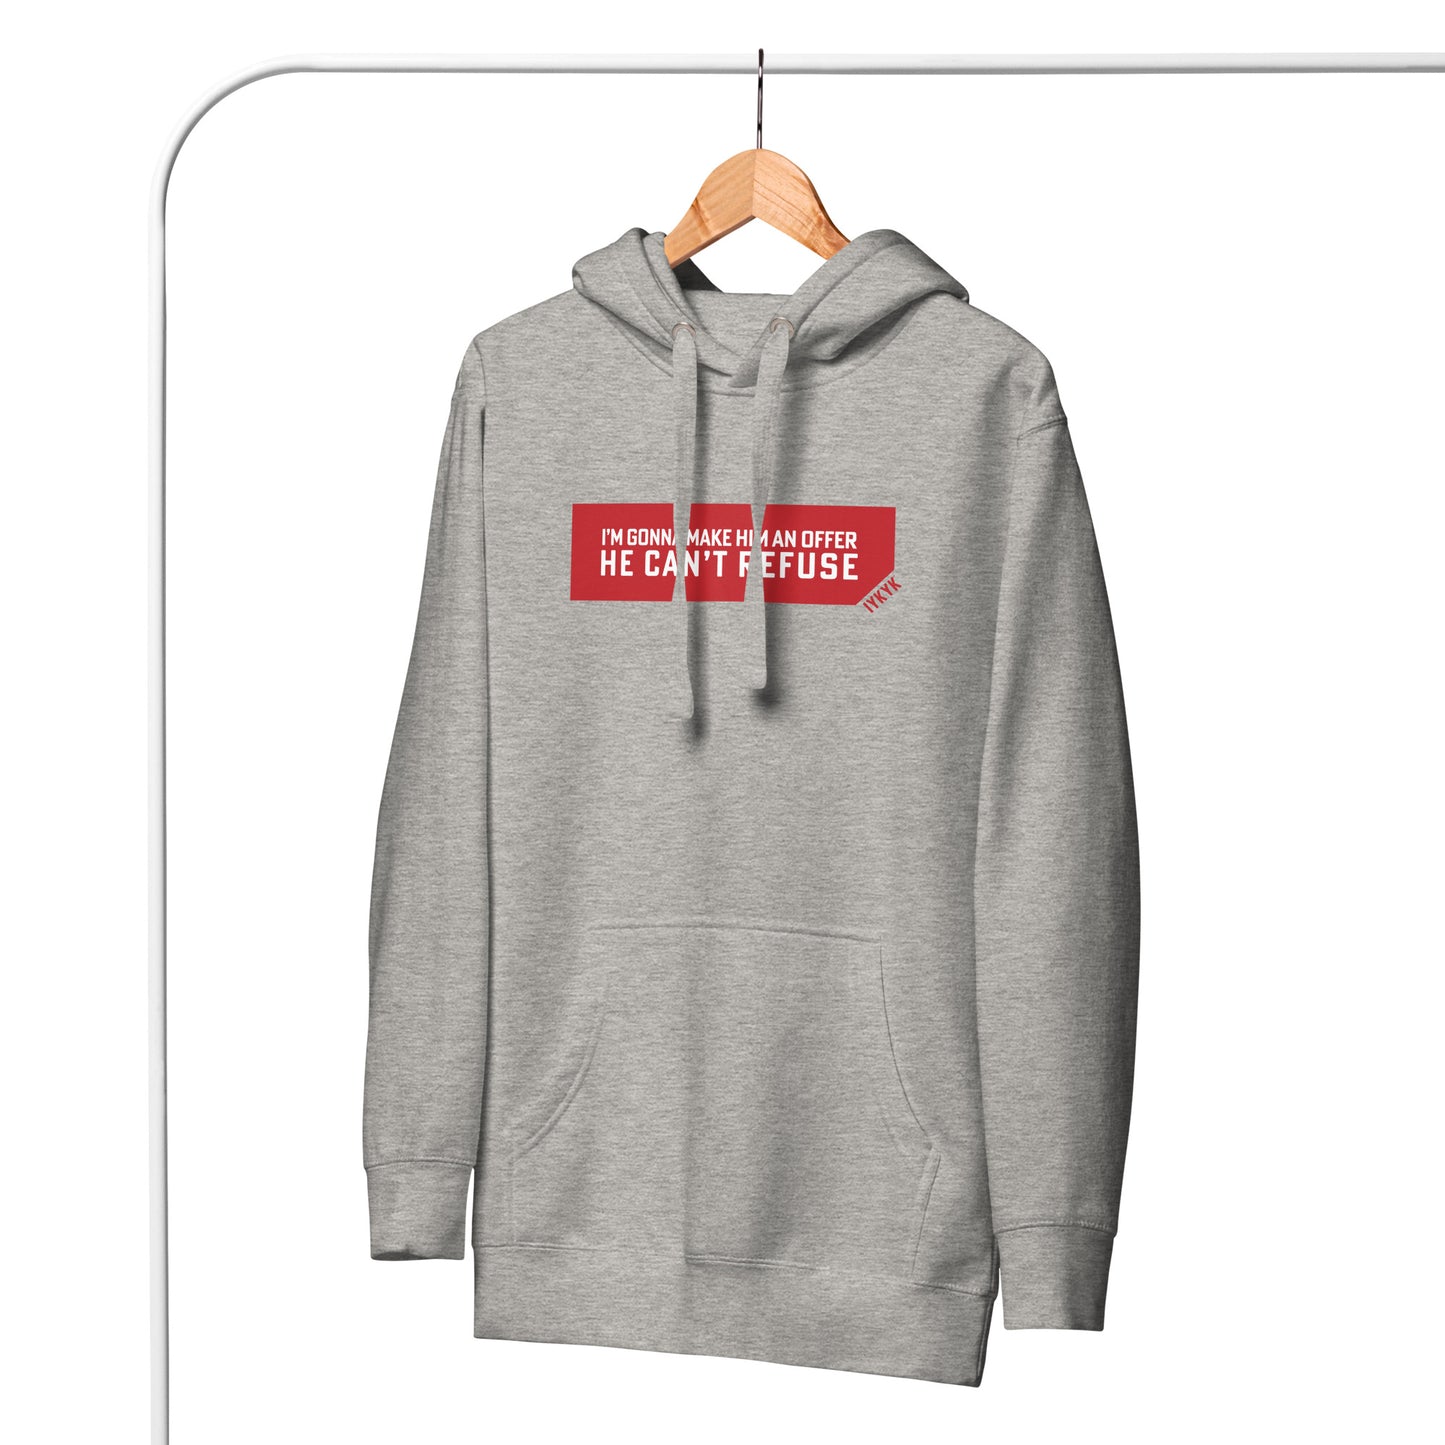 Premium The Godfather Offer Hoodie